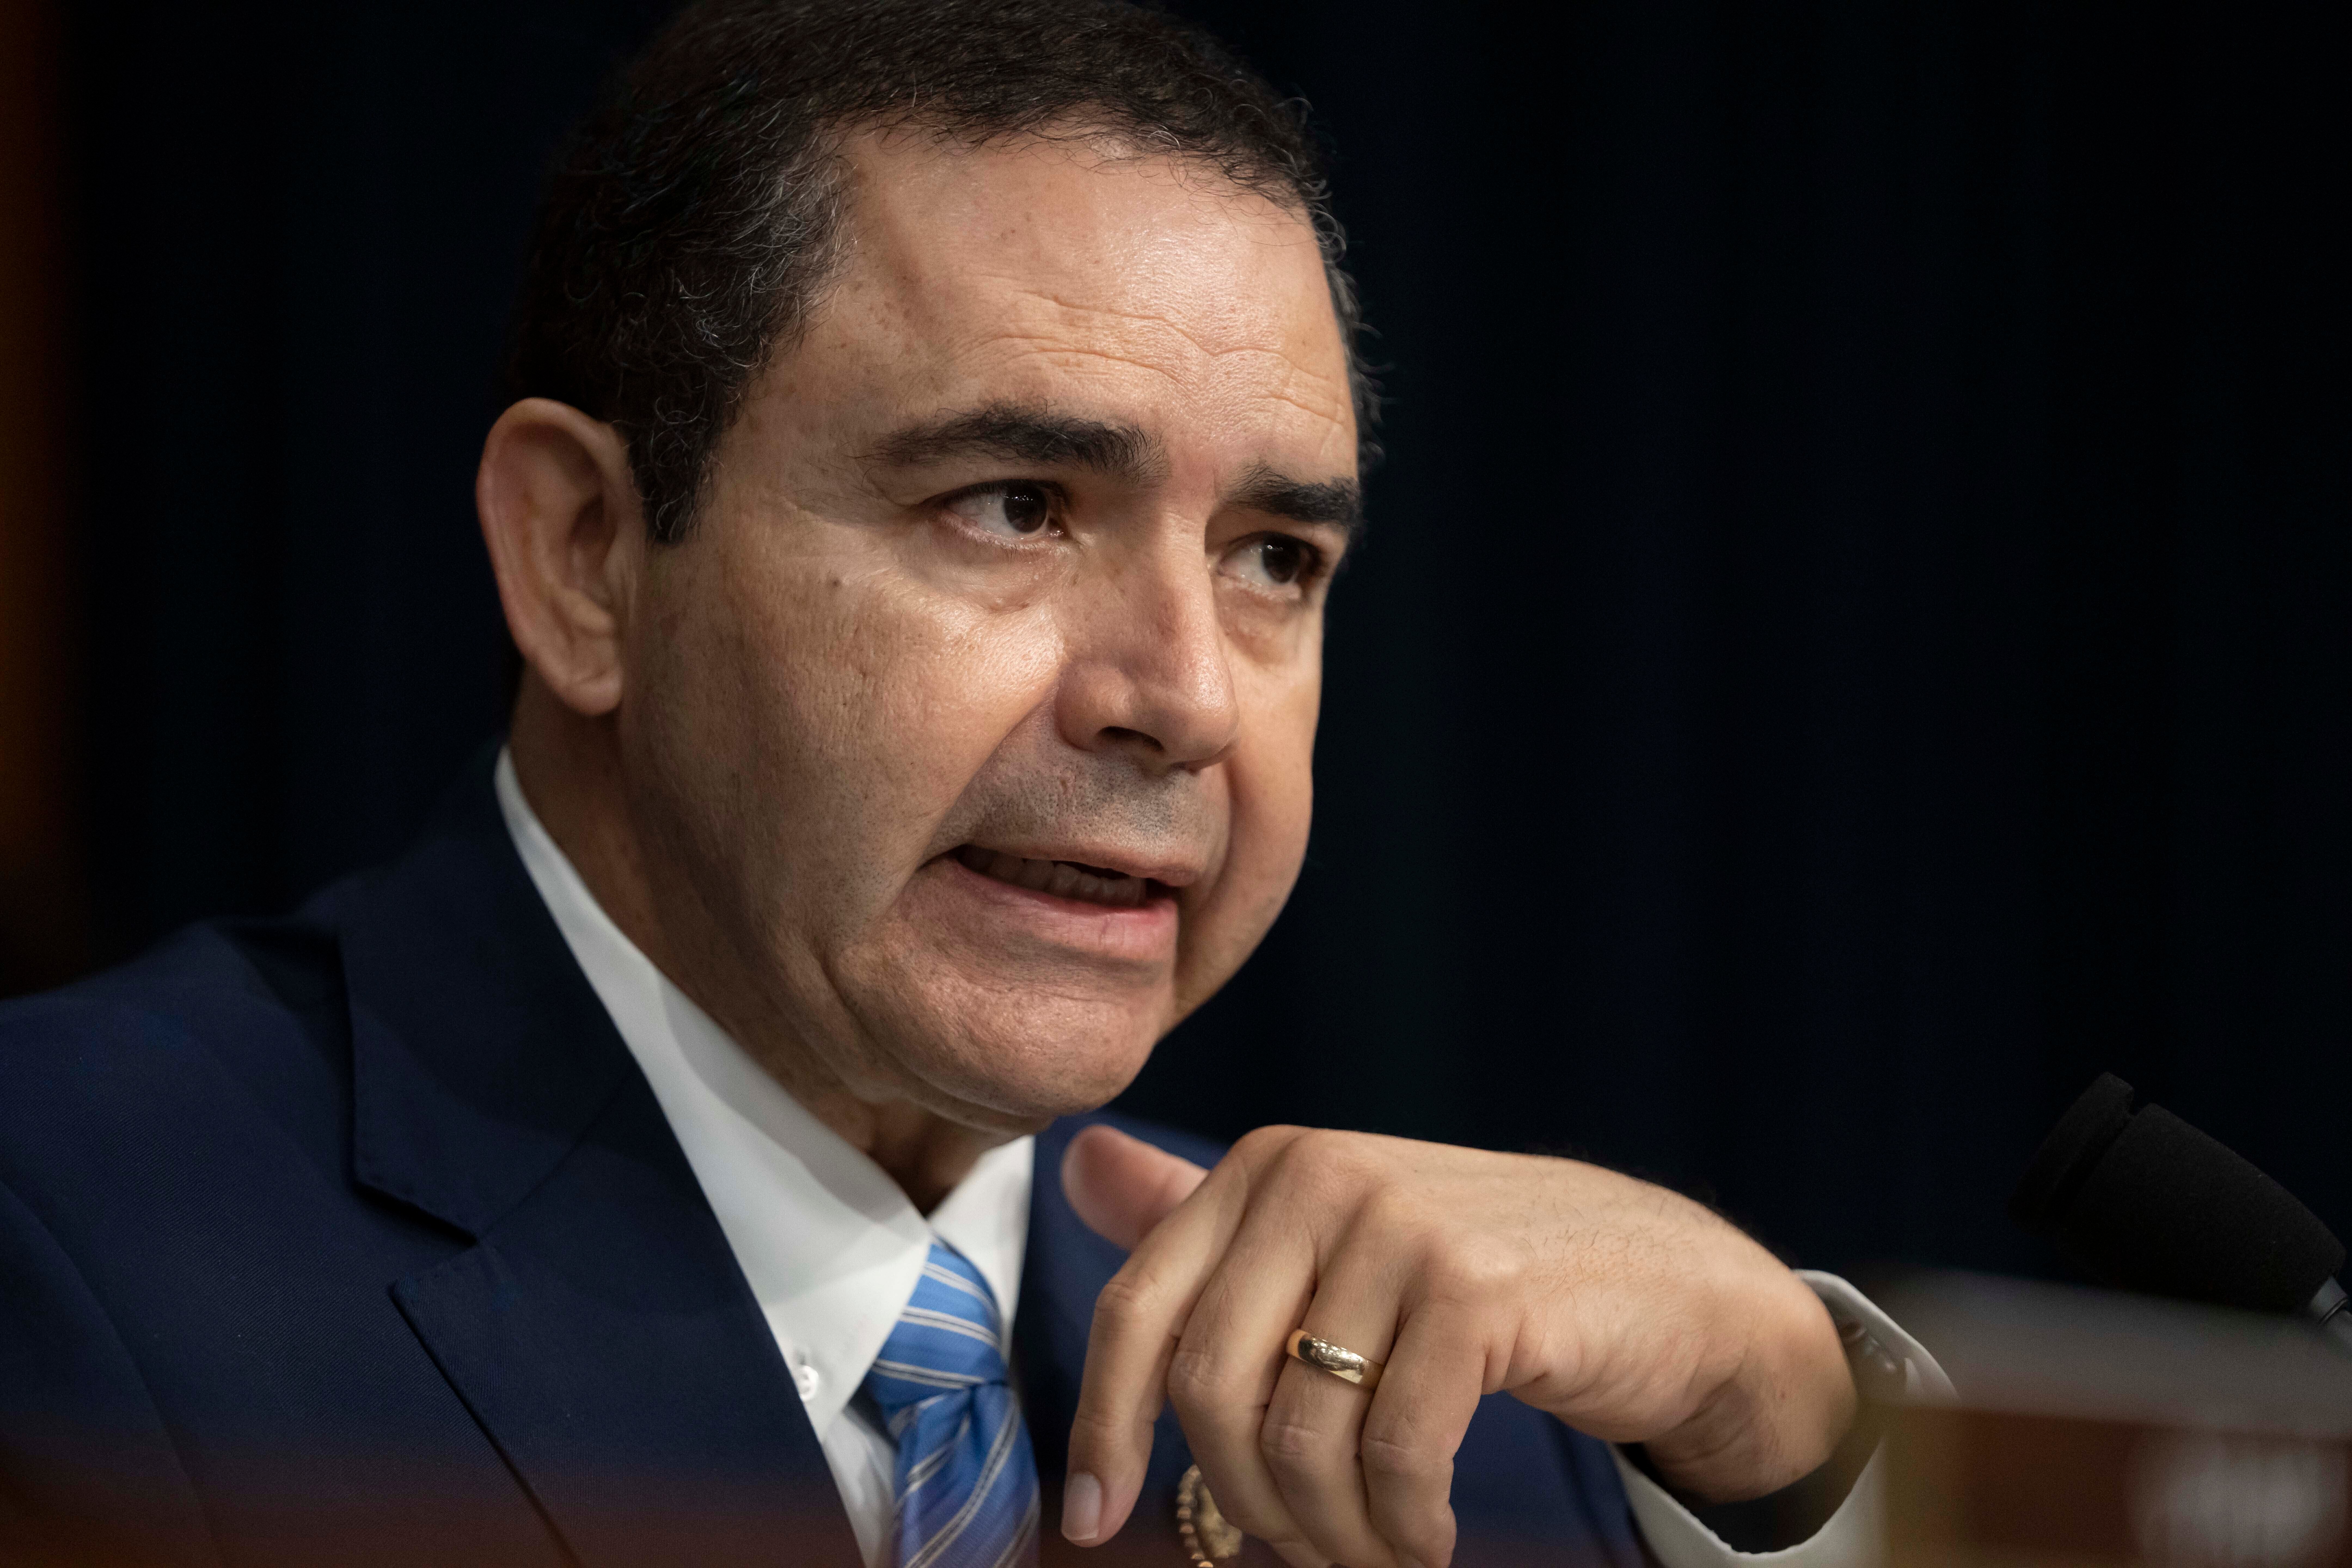 Texas Rep. Henry Cuellar charged with bribery, money laundering